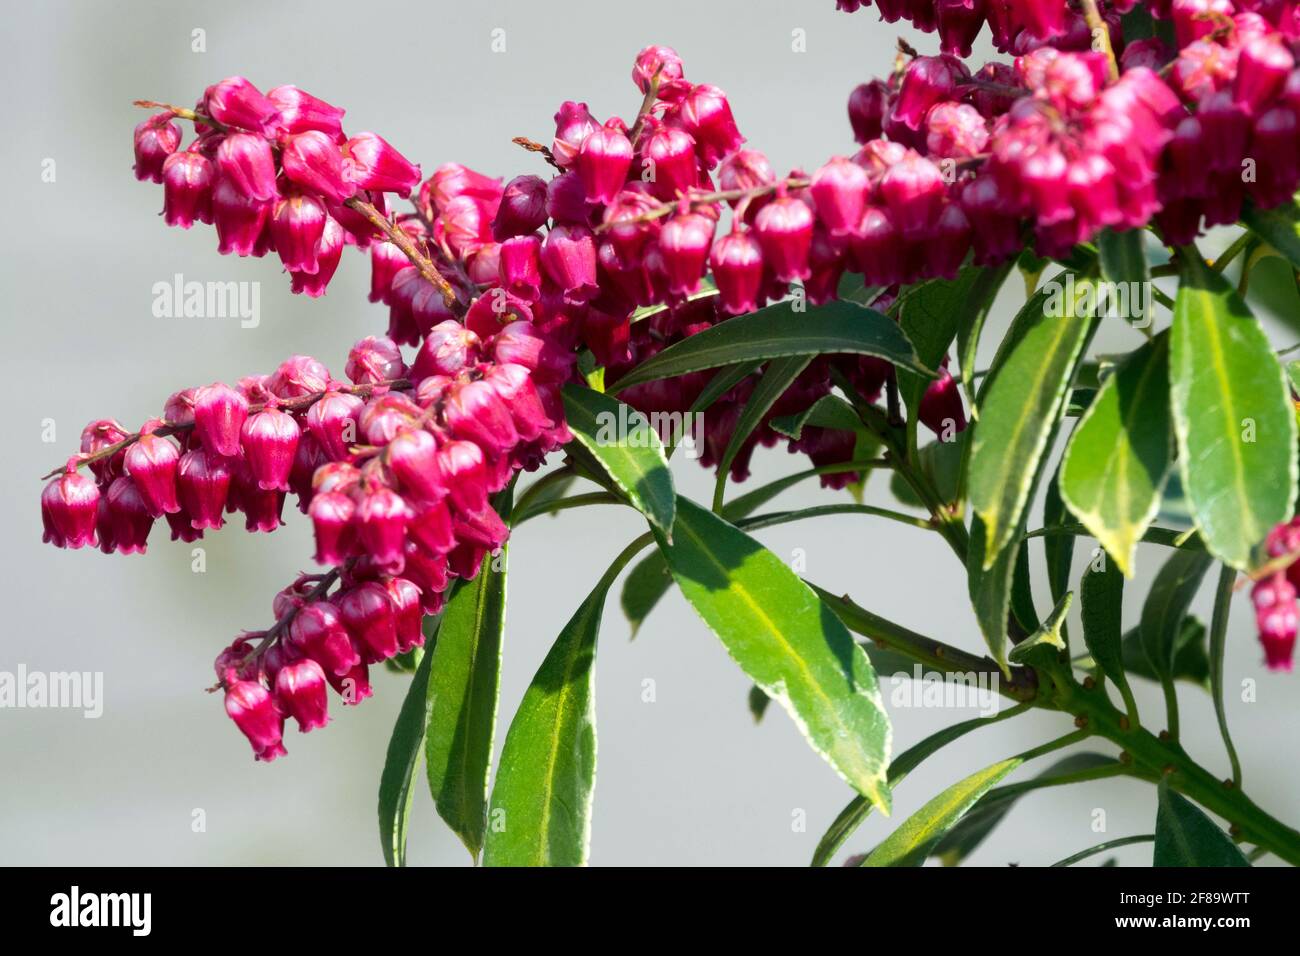 Japanese Pieris japonica 'Polar Passion' Japanese Andromeda Blooming Beauty Red Flower Blossoms Pieris japonica Leaves Branch Flowering Plant Spring Stock Photo